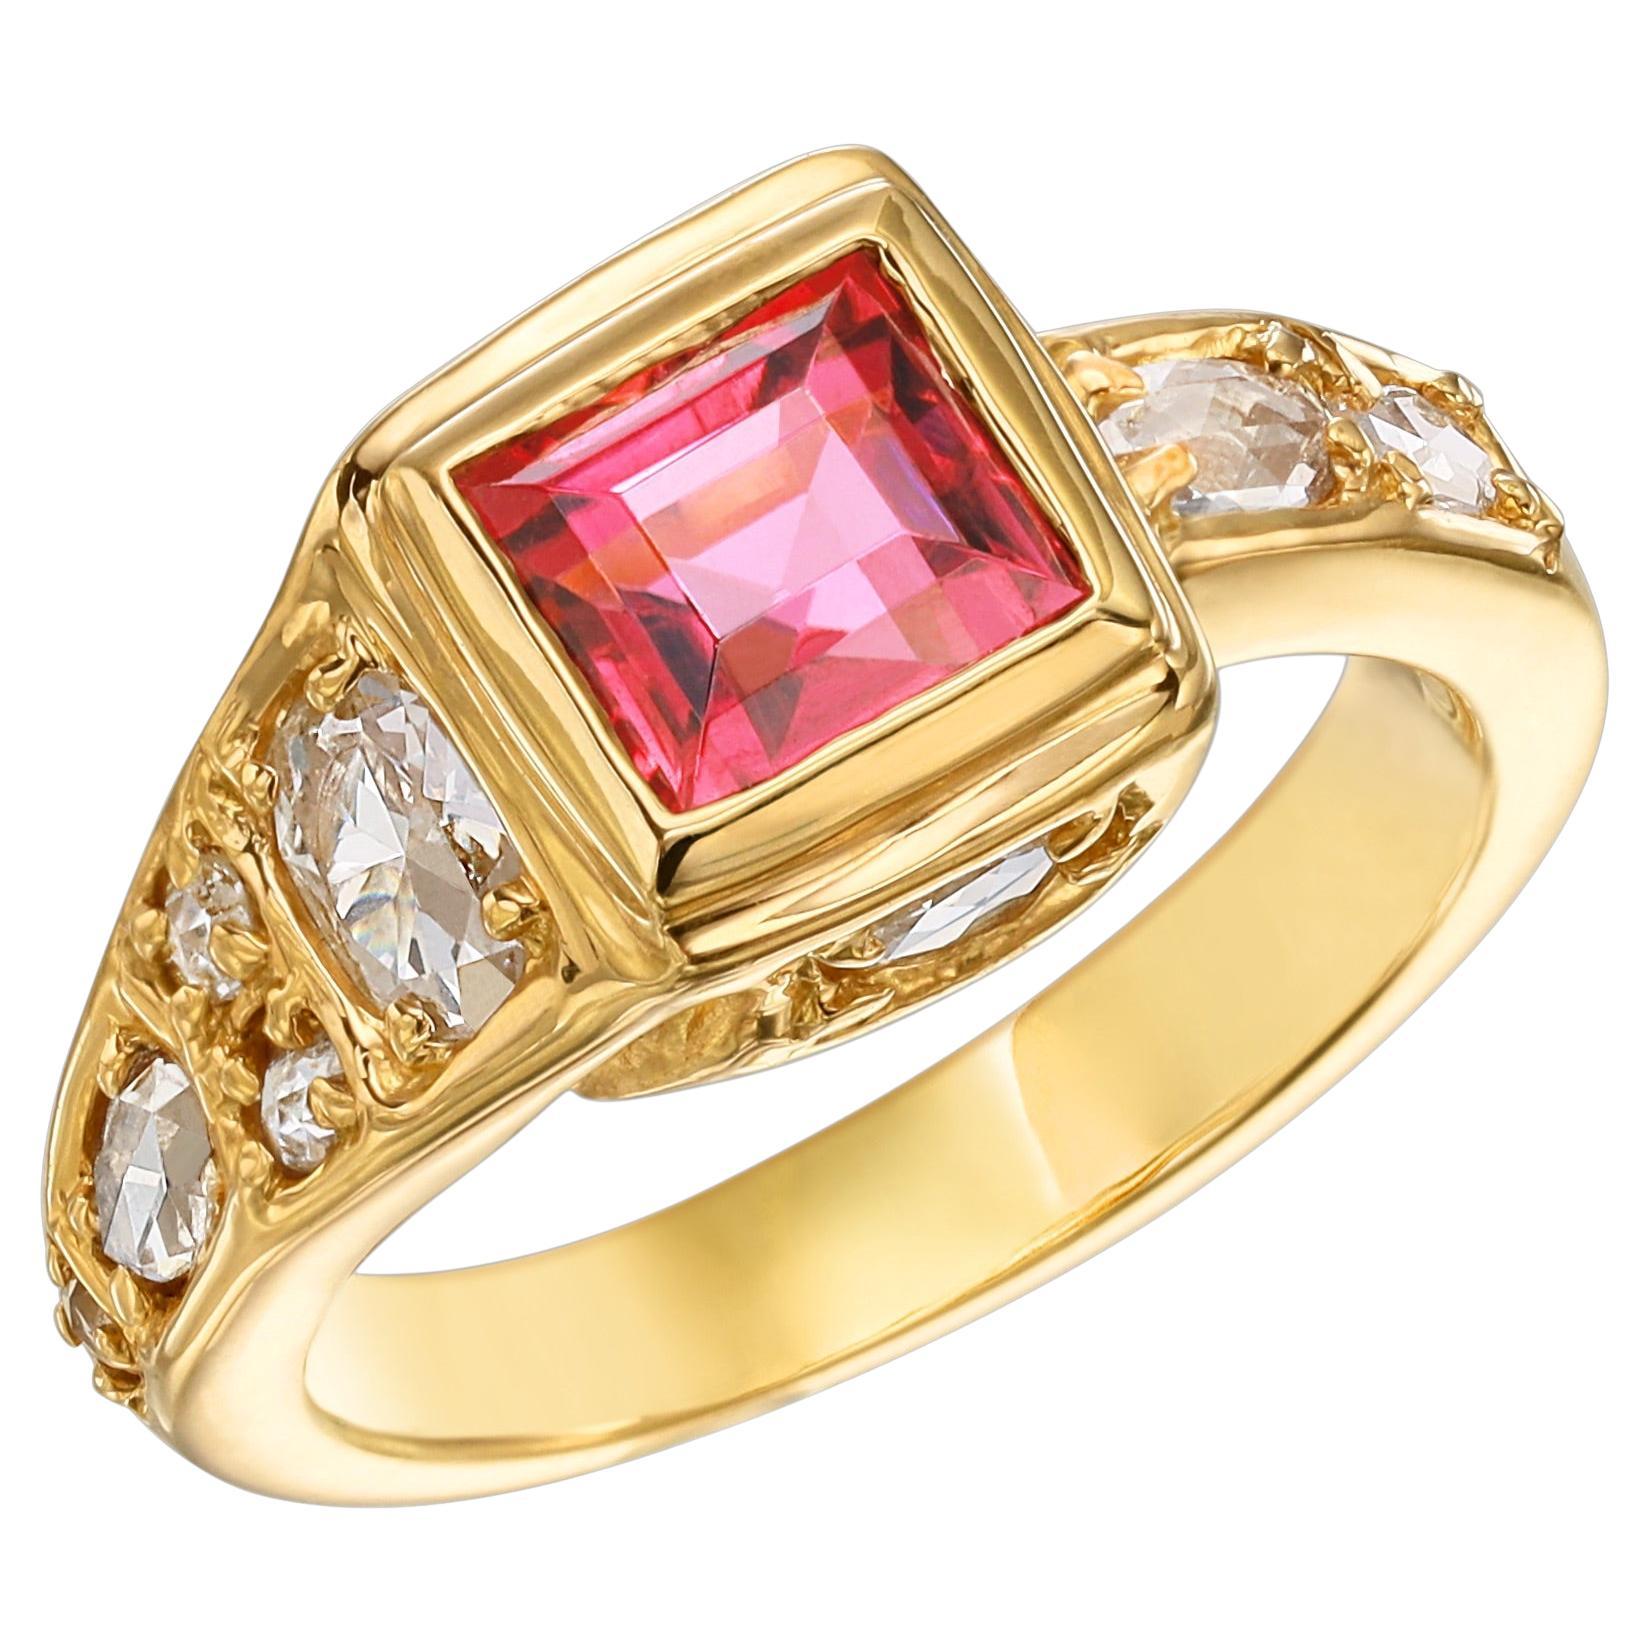 20k Yellow Gold Ring with Pink Tourmaline Square and White Rose Cut Diamonds For Sale